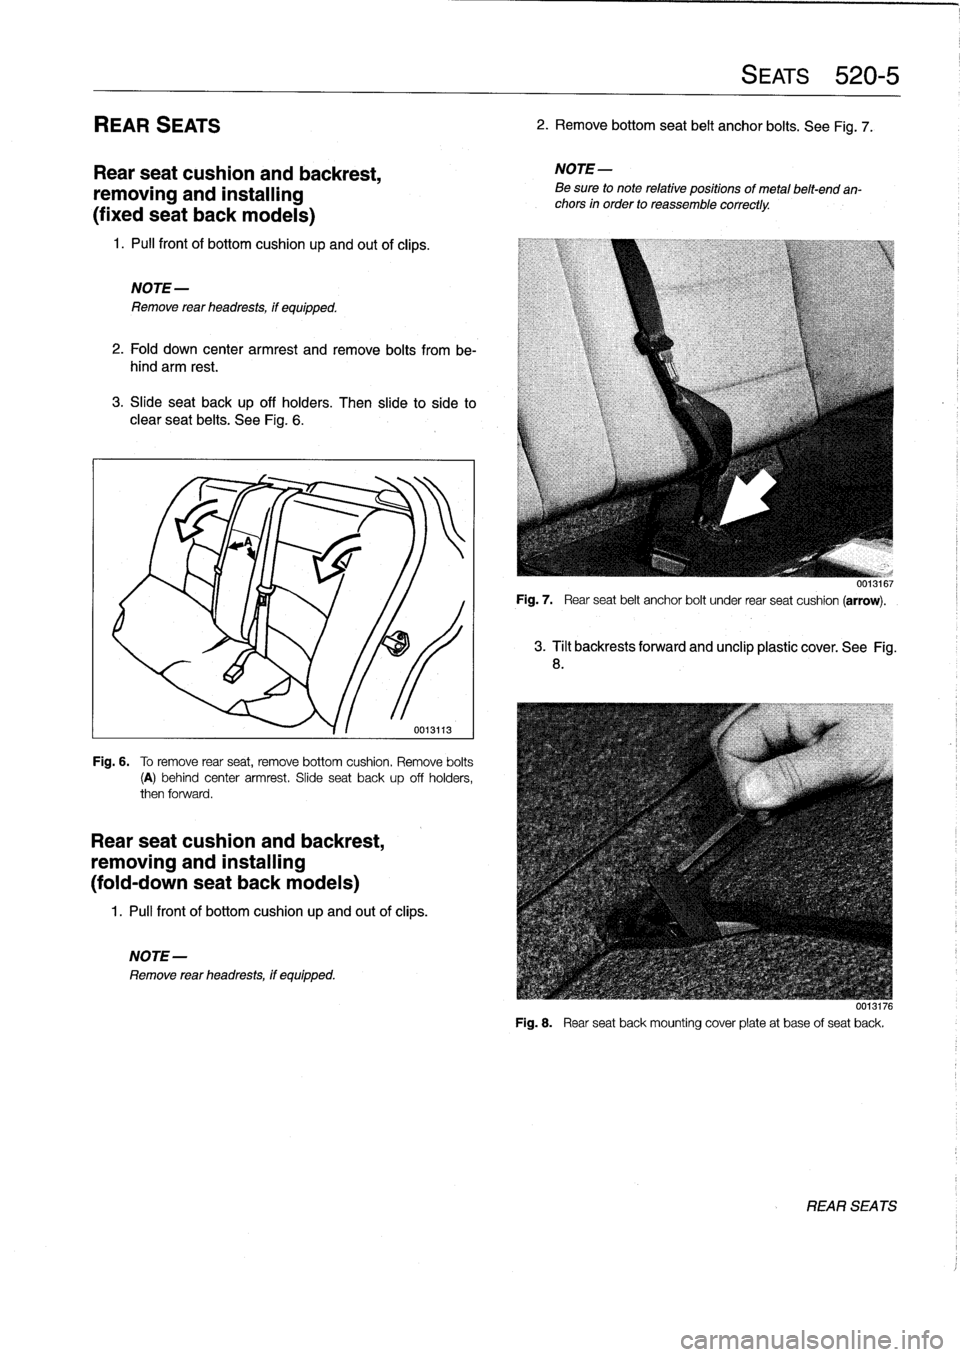 BMW 318i 1995 E36 Workshop Manual 
REAR
SEATS

Rear
seat
cushion
and
backrest,

removing
and
installing

(fixed
seat
back
modeis)

1
.
Pull
front
of
bottomcushion
up
and
out
of
clips
.

NOTE-

Remove
rear
headrests,
if
equipped
.

2
.